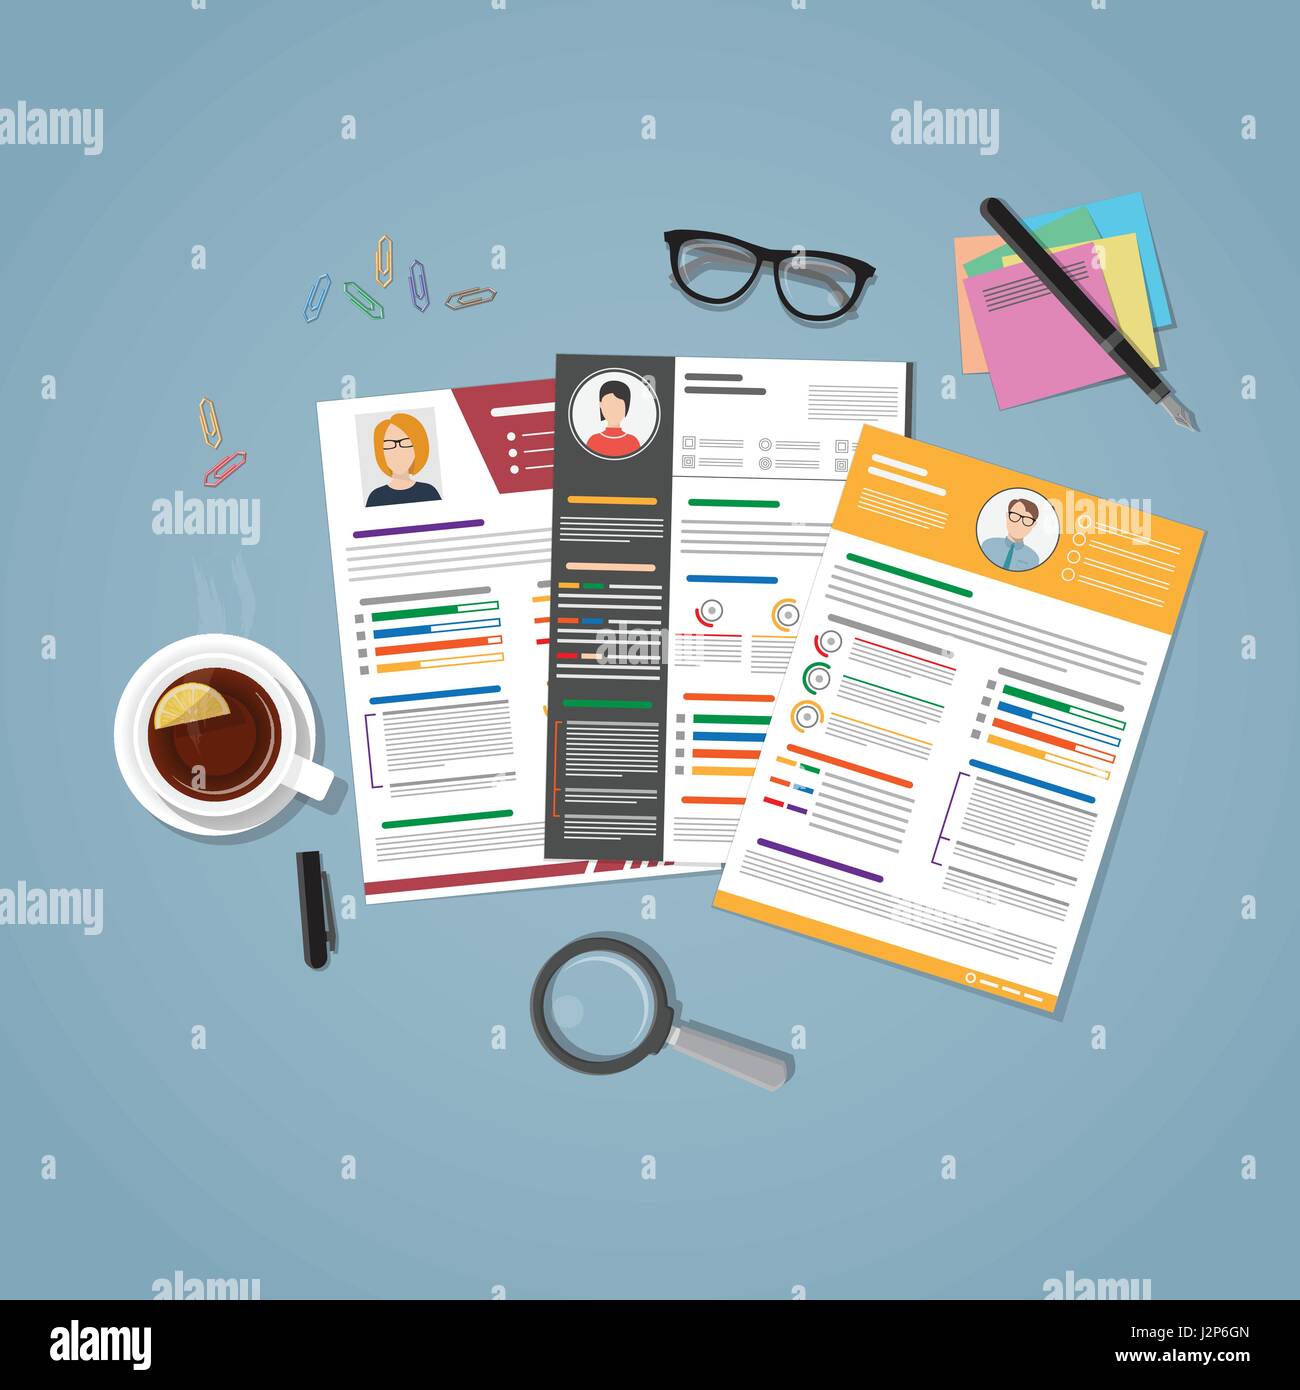 Workplace for recruitment Stock Vector